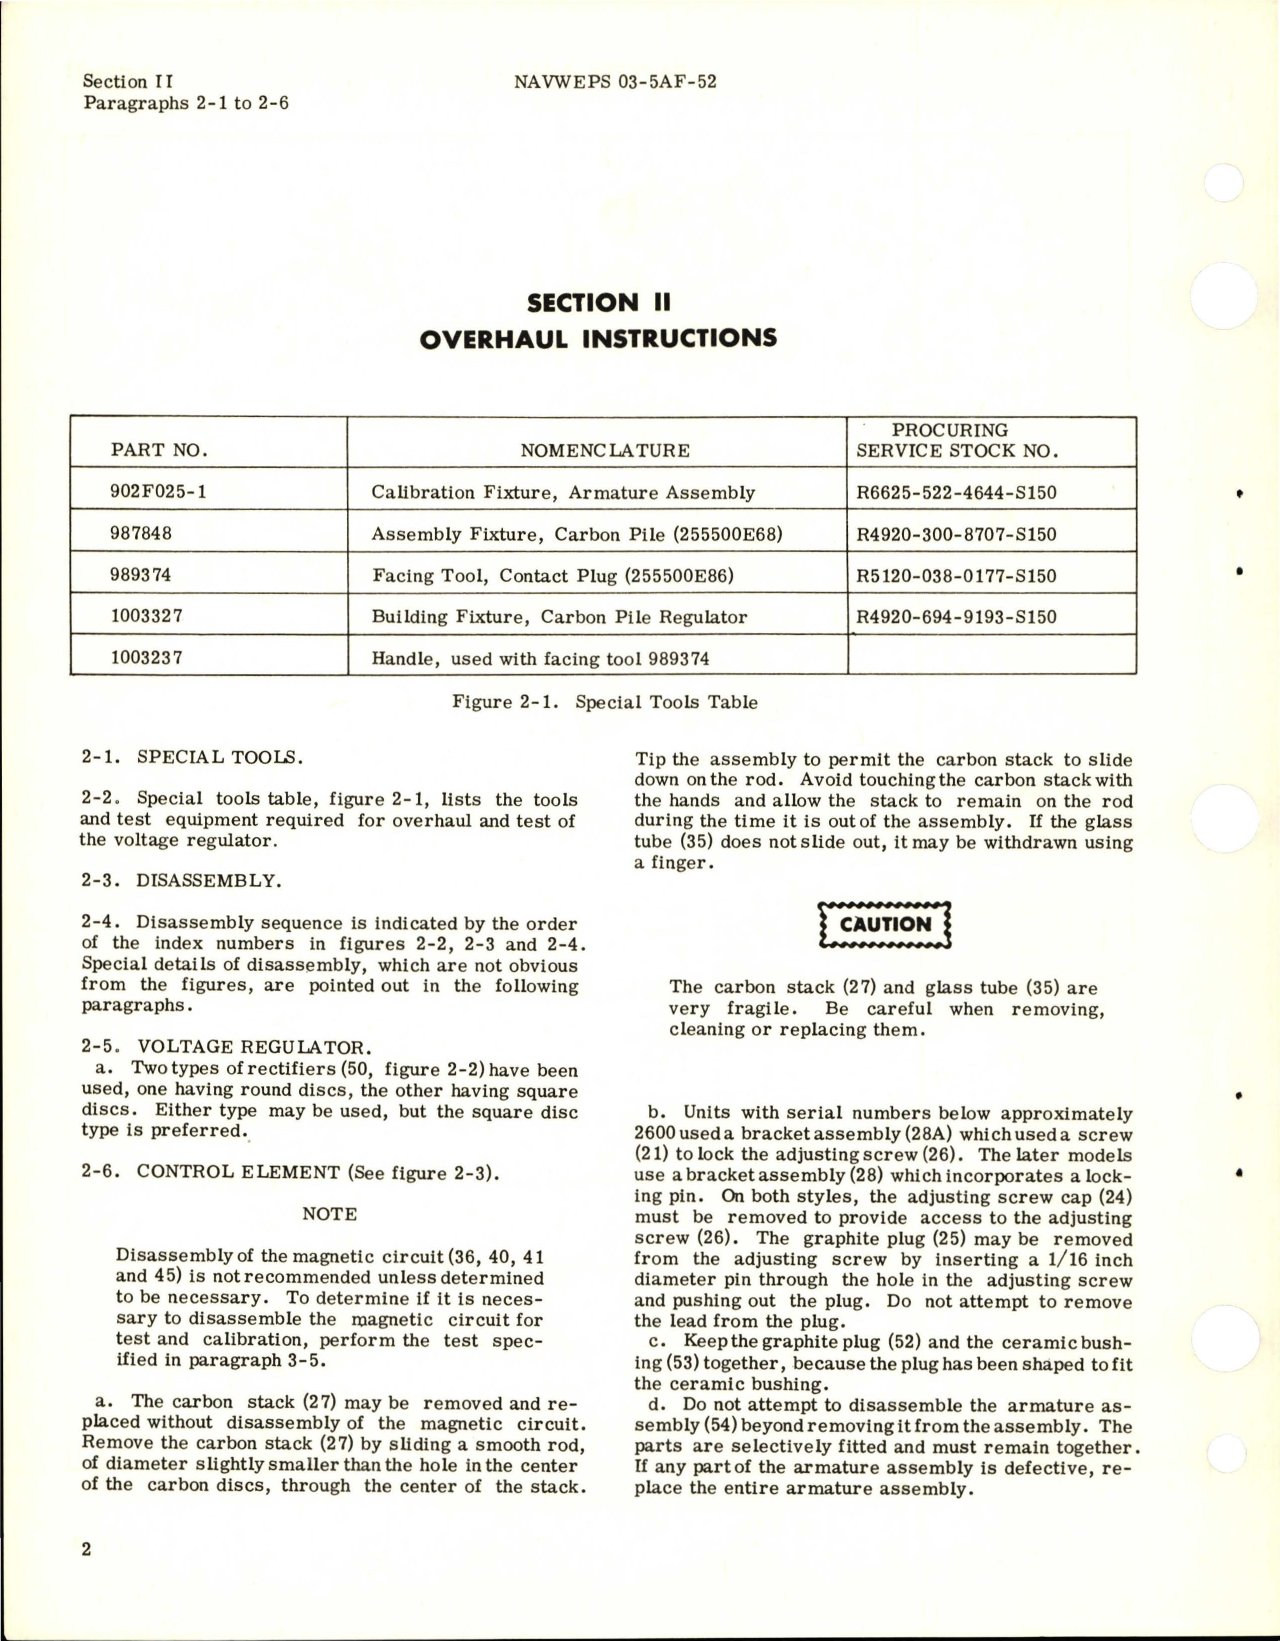 Sample page 6 from AirCorps Library document: Overhaul Instructions for AC Voltage Regulator - Part A14A9694-2 